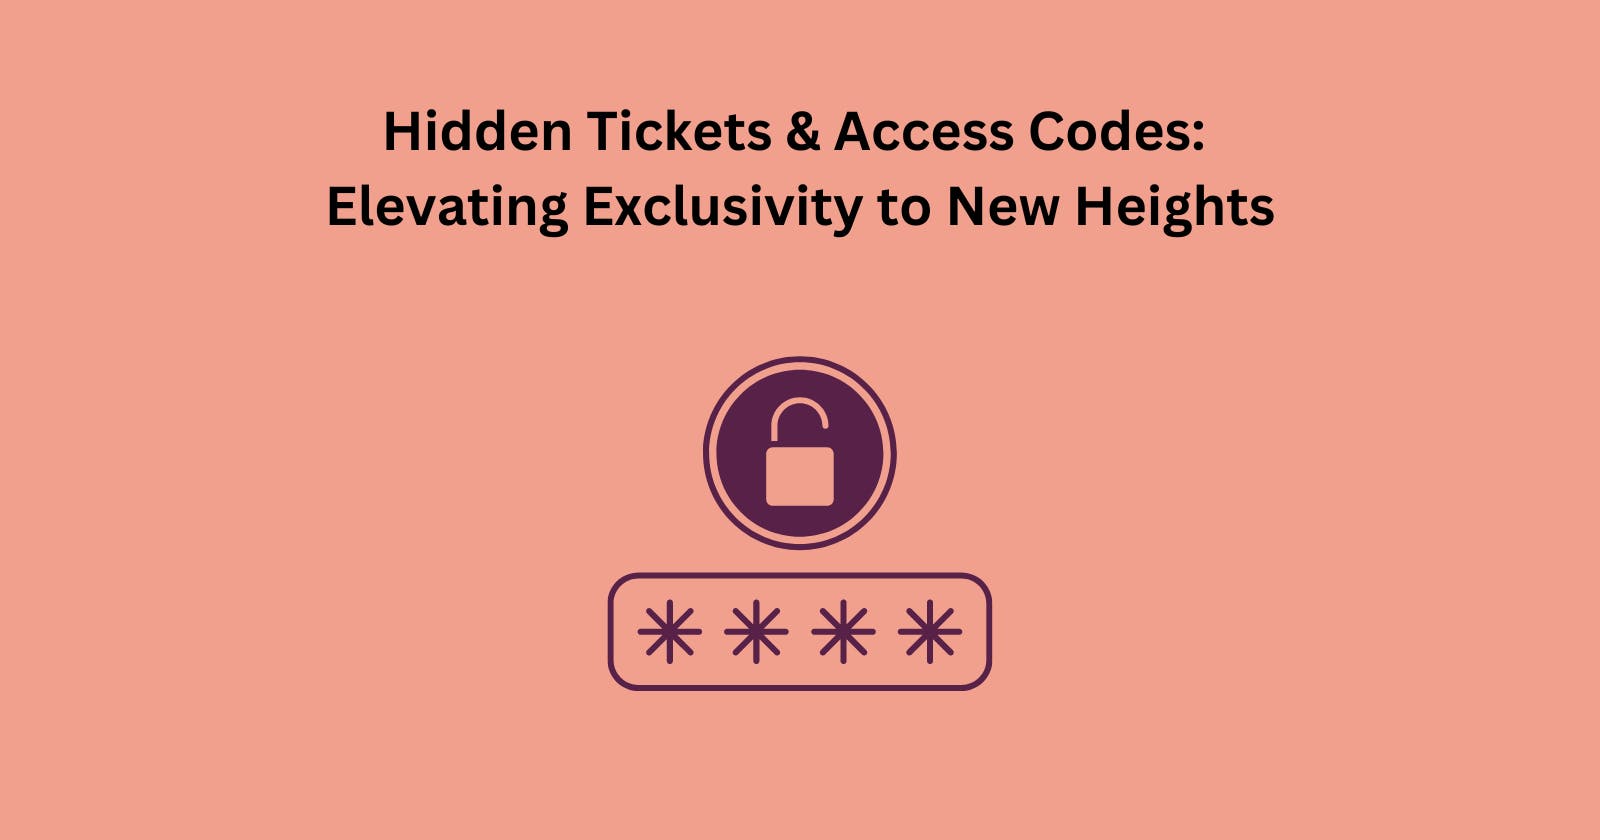 Hidden Tickets & Access Codes: Elevating Exclusivity to New Heights